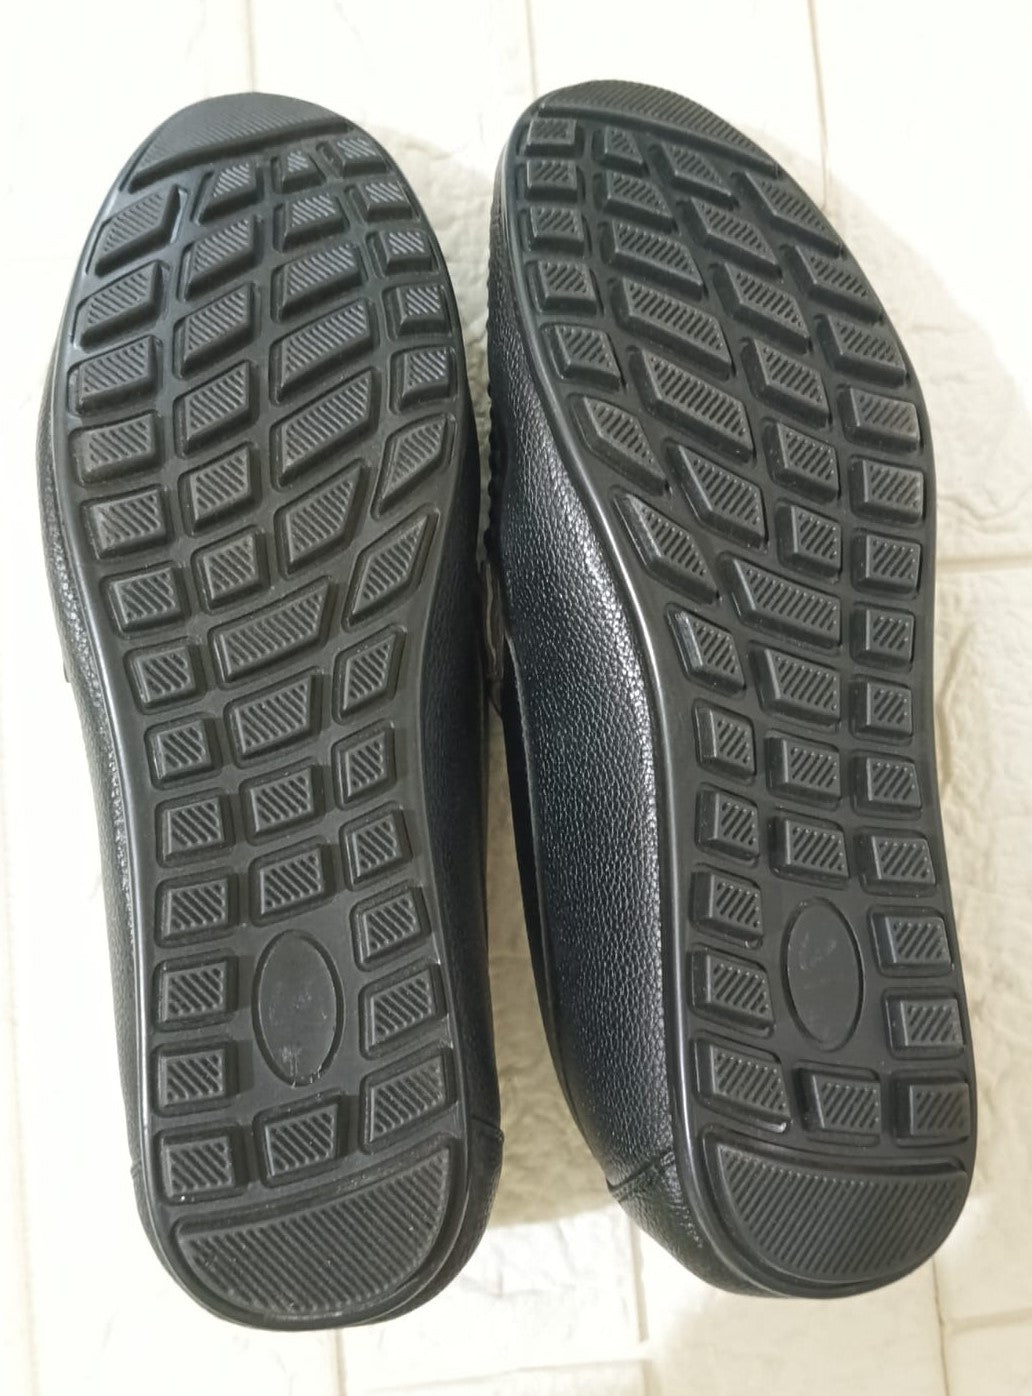 Loafers Shoes For Men - Defective